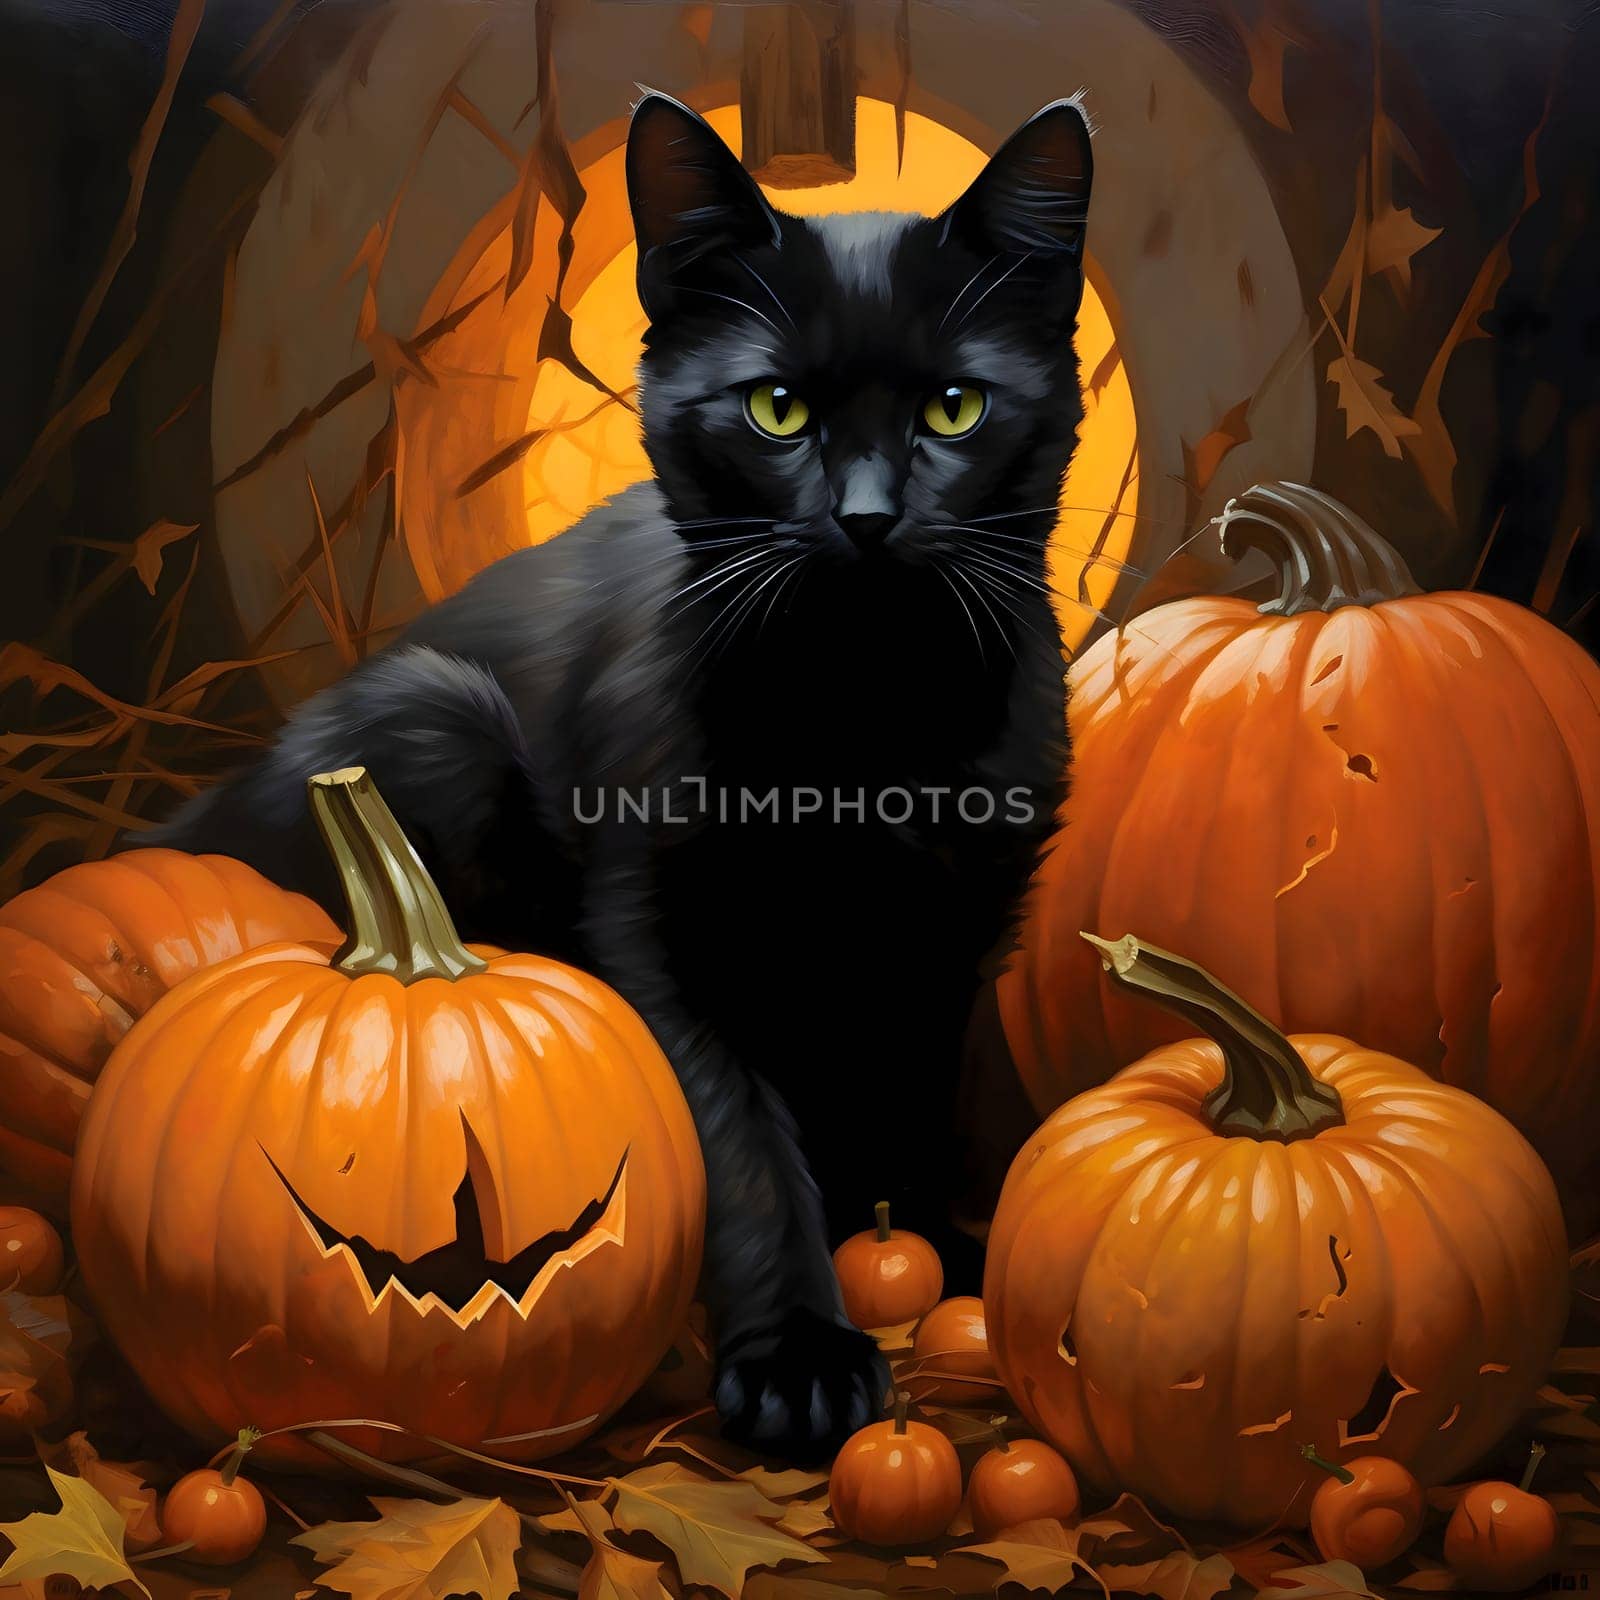 Black cat around the pumpkins, a Halloween image. by ThemesS